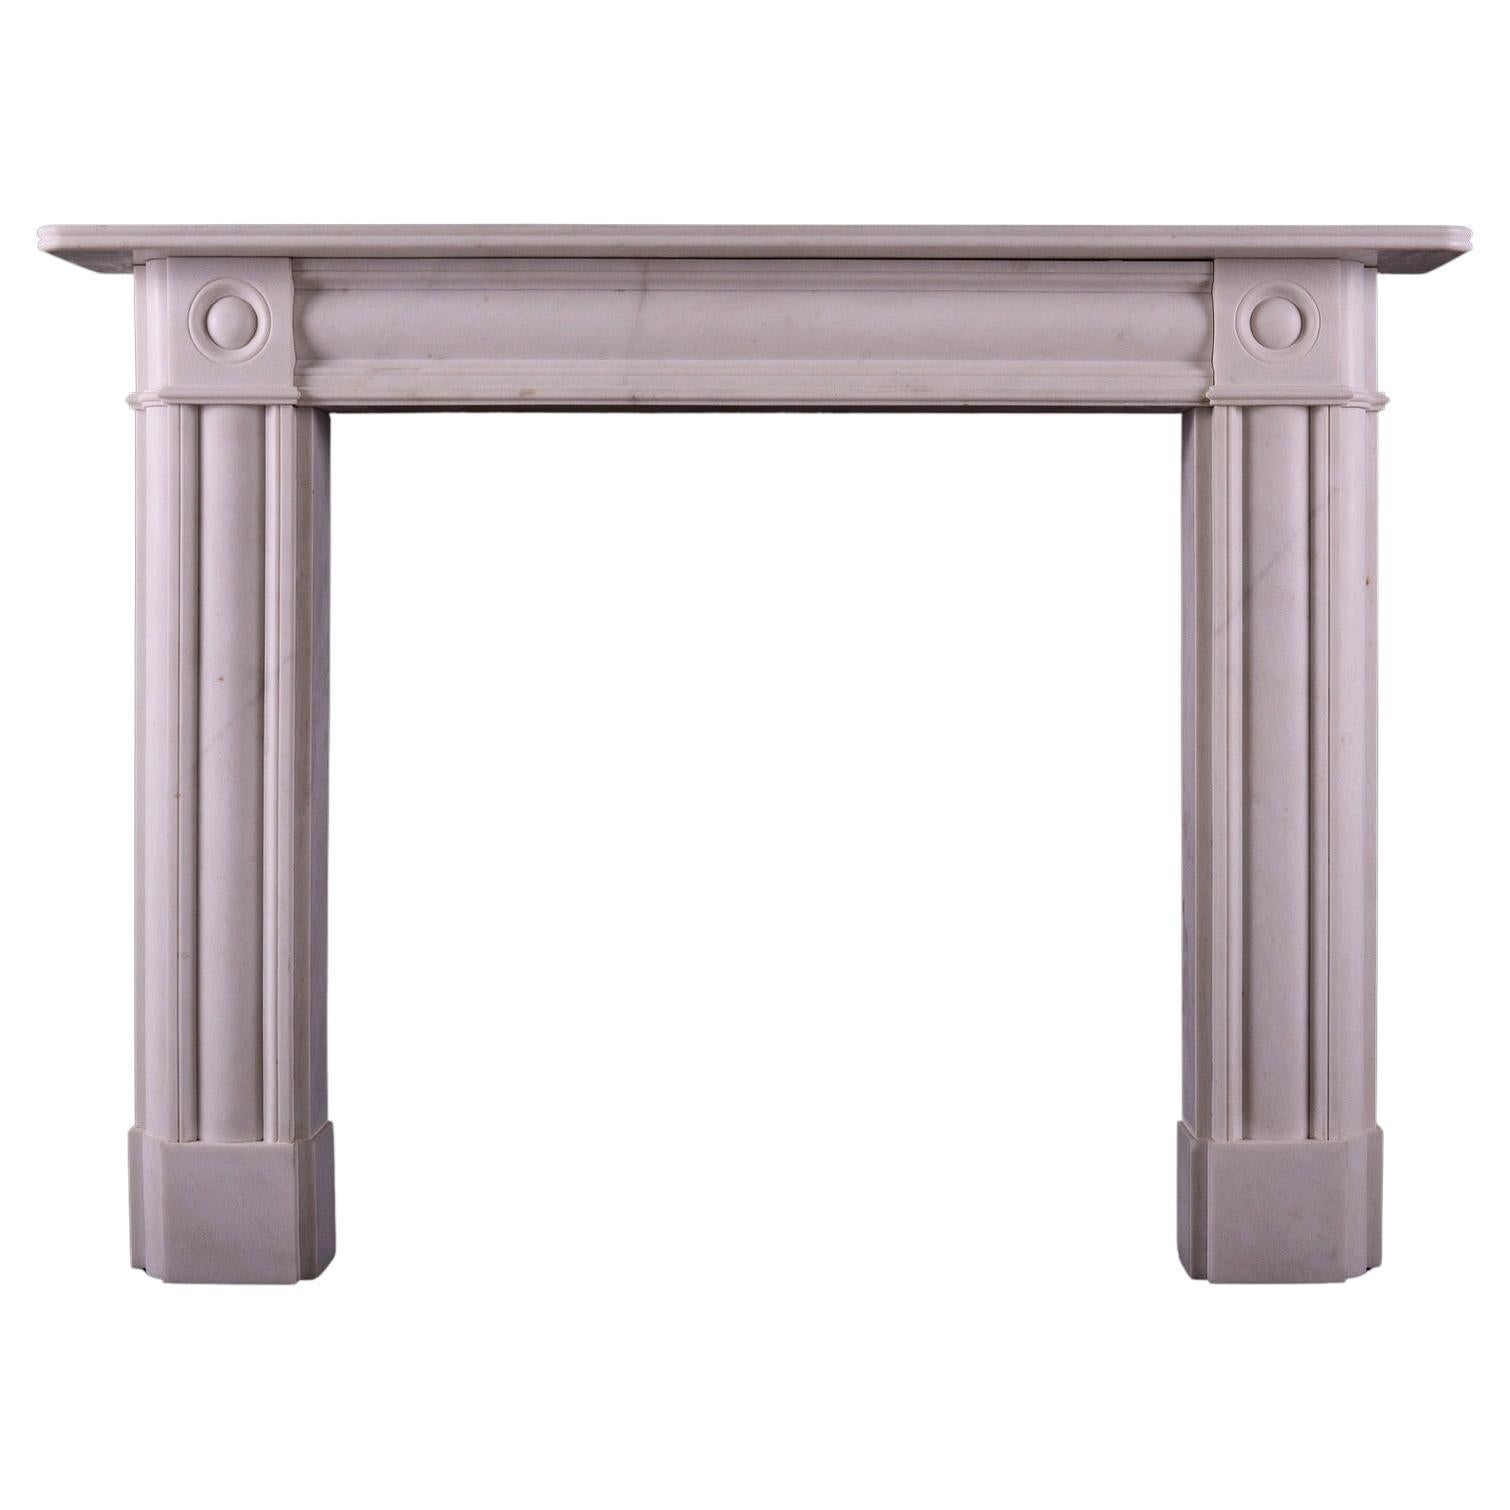 A White Marble Fireplace in the Regency Manner For Sale